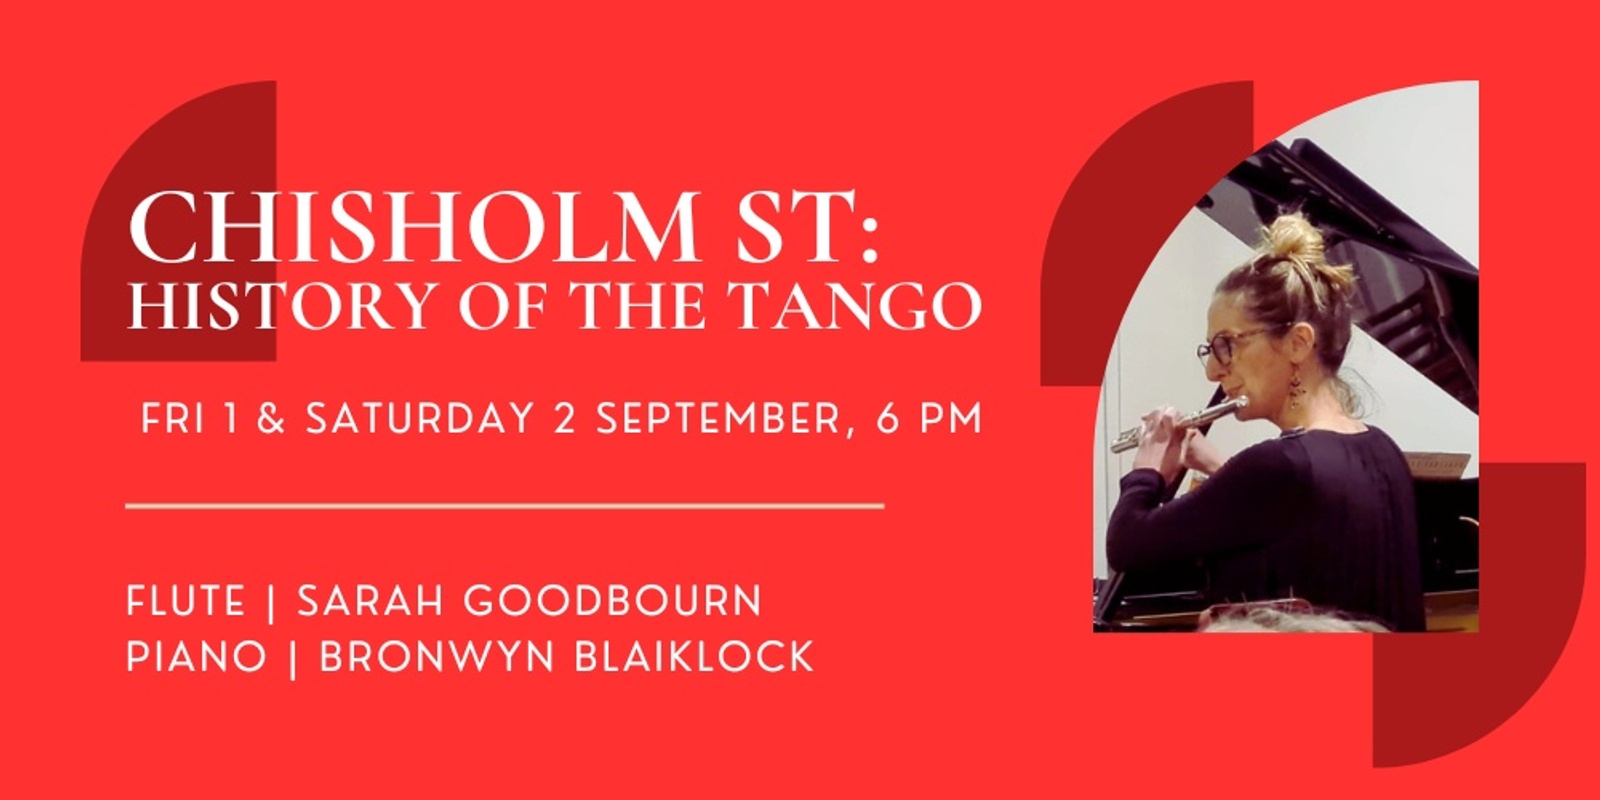 Chisholm St: History of the Tango (new dates!)